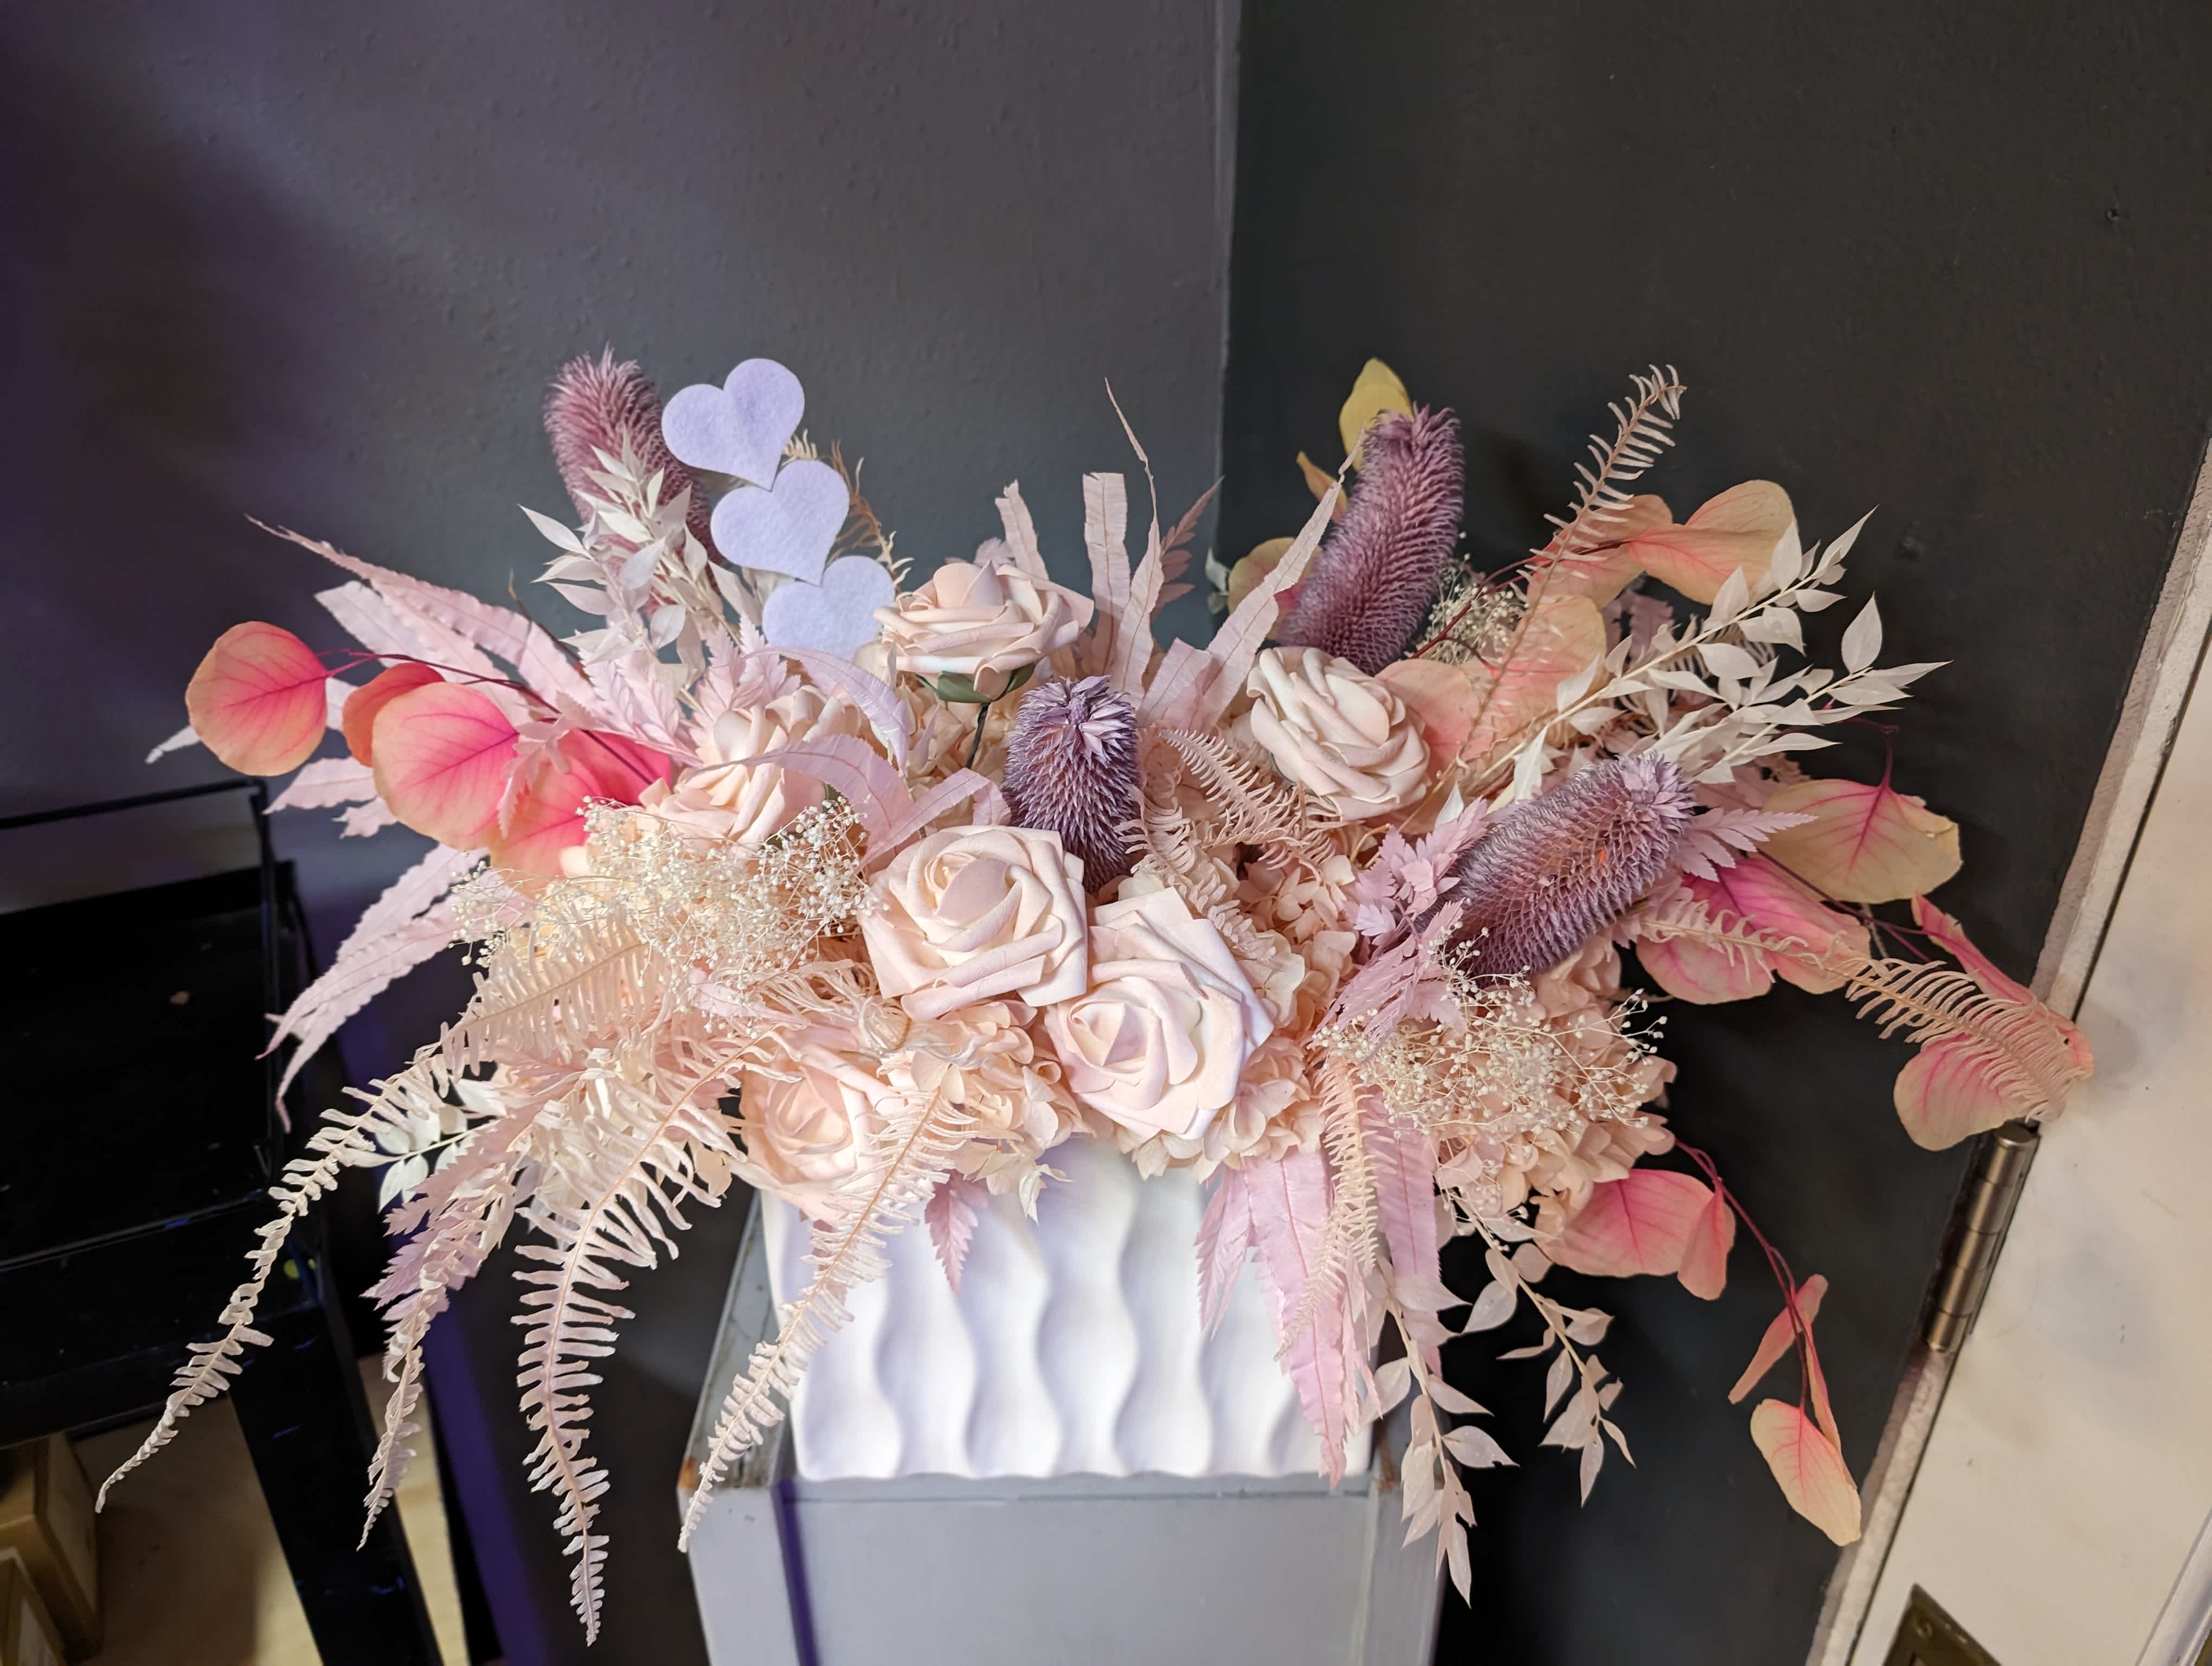 Dried Floral Arrangement - A unique one-of-a-kind dried pink floral arrangement. All elements are dried and will not need any water so they will be very long lasting. A fun piece to add a beautiful and whimsical touch to any space.